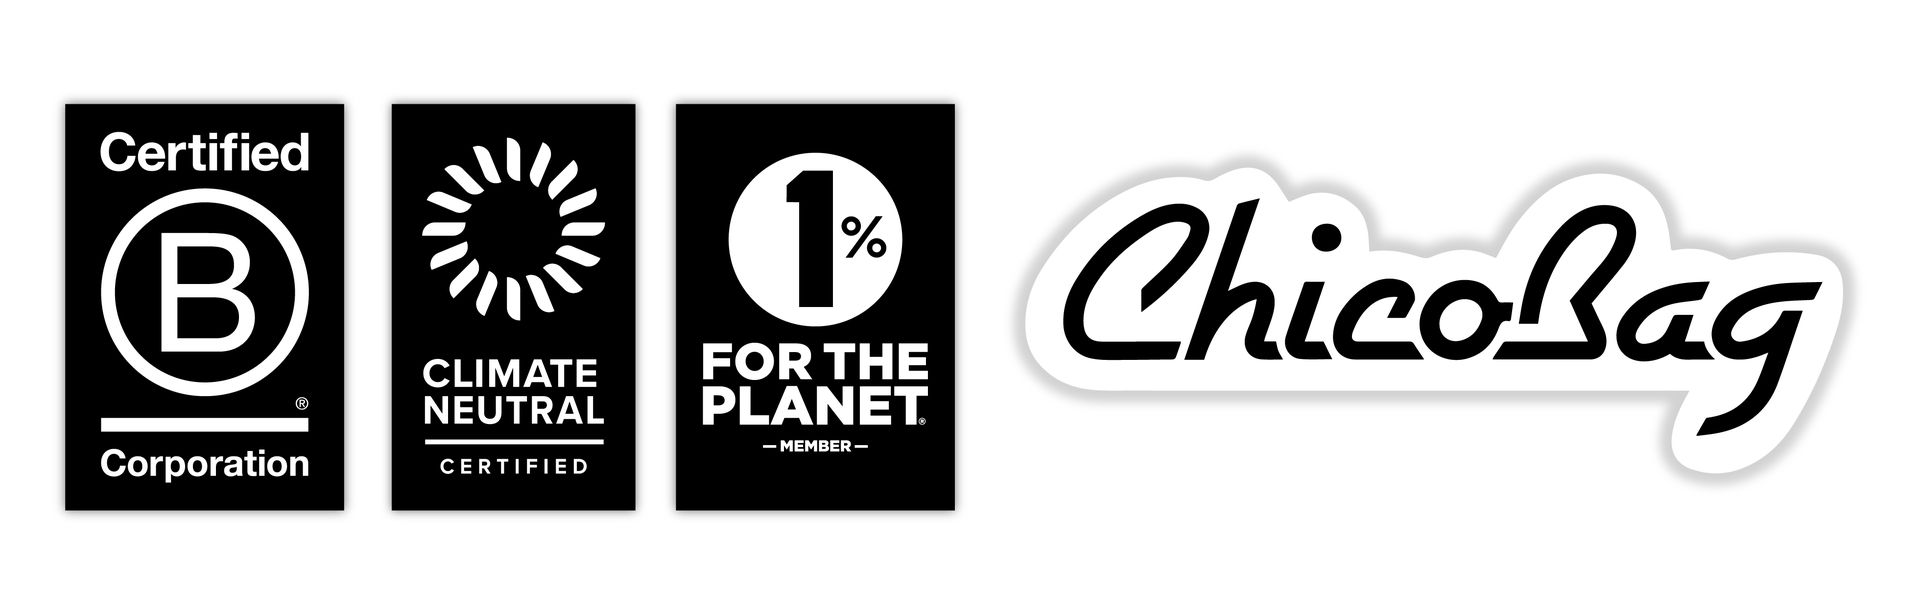 The Chicobag Logo along with their acredidations like B corp certified, Climate Neutral Certified and 1% for the Planet Member